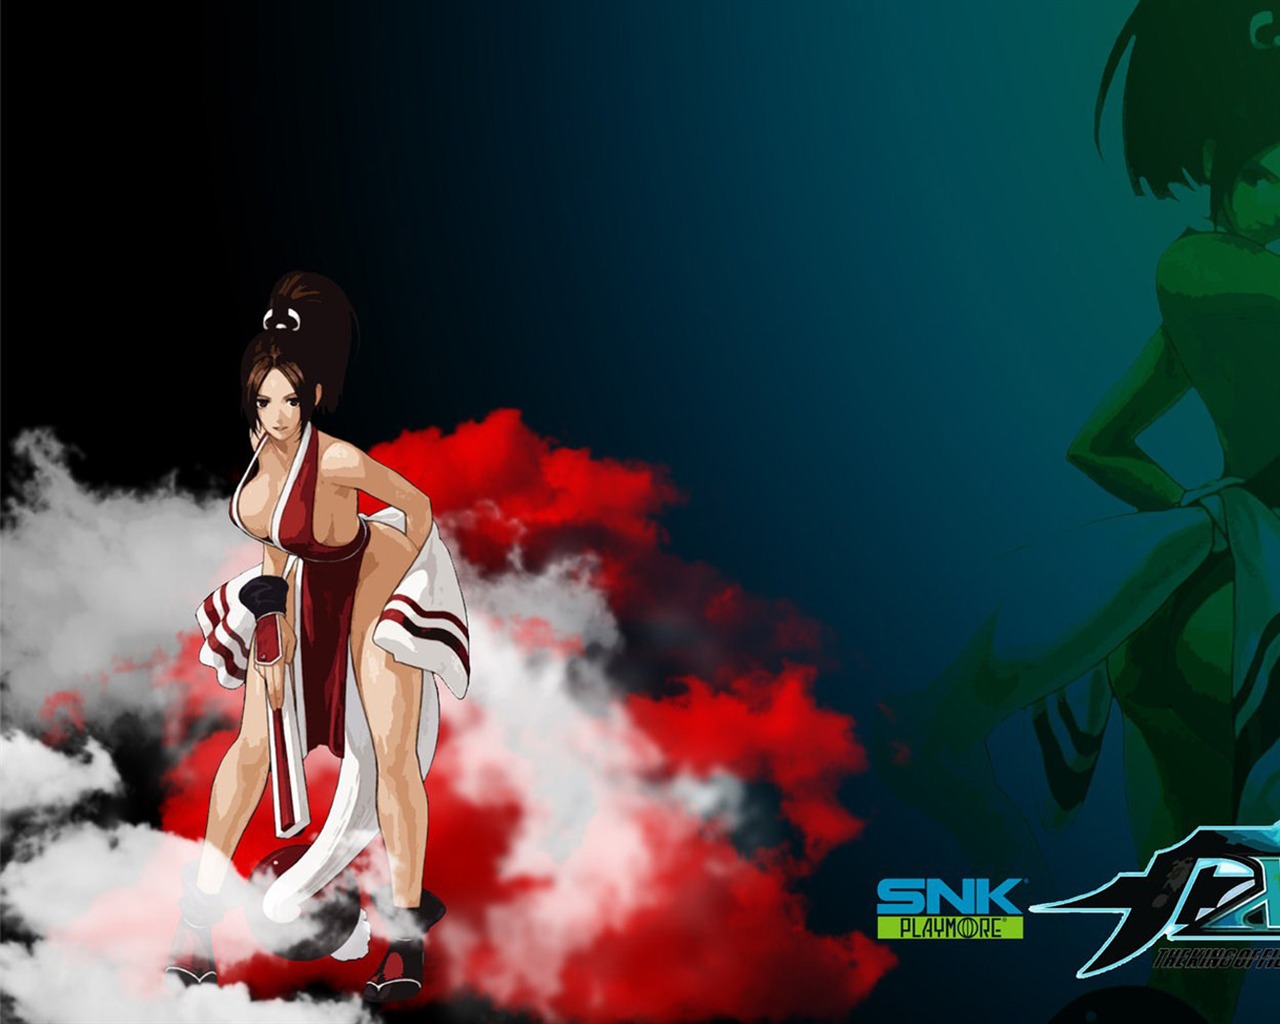 The King of Fighters XIII 拳皇13 壁纸专辑16 - 1280x1024